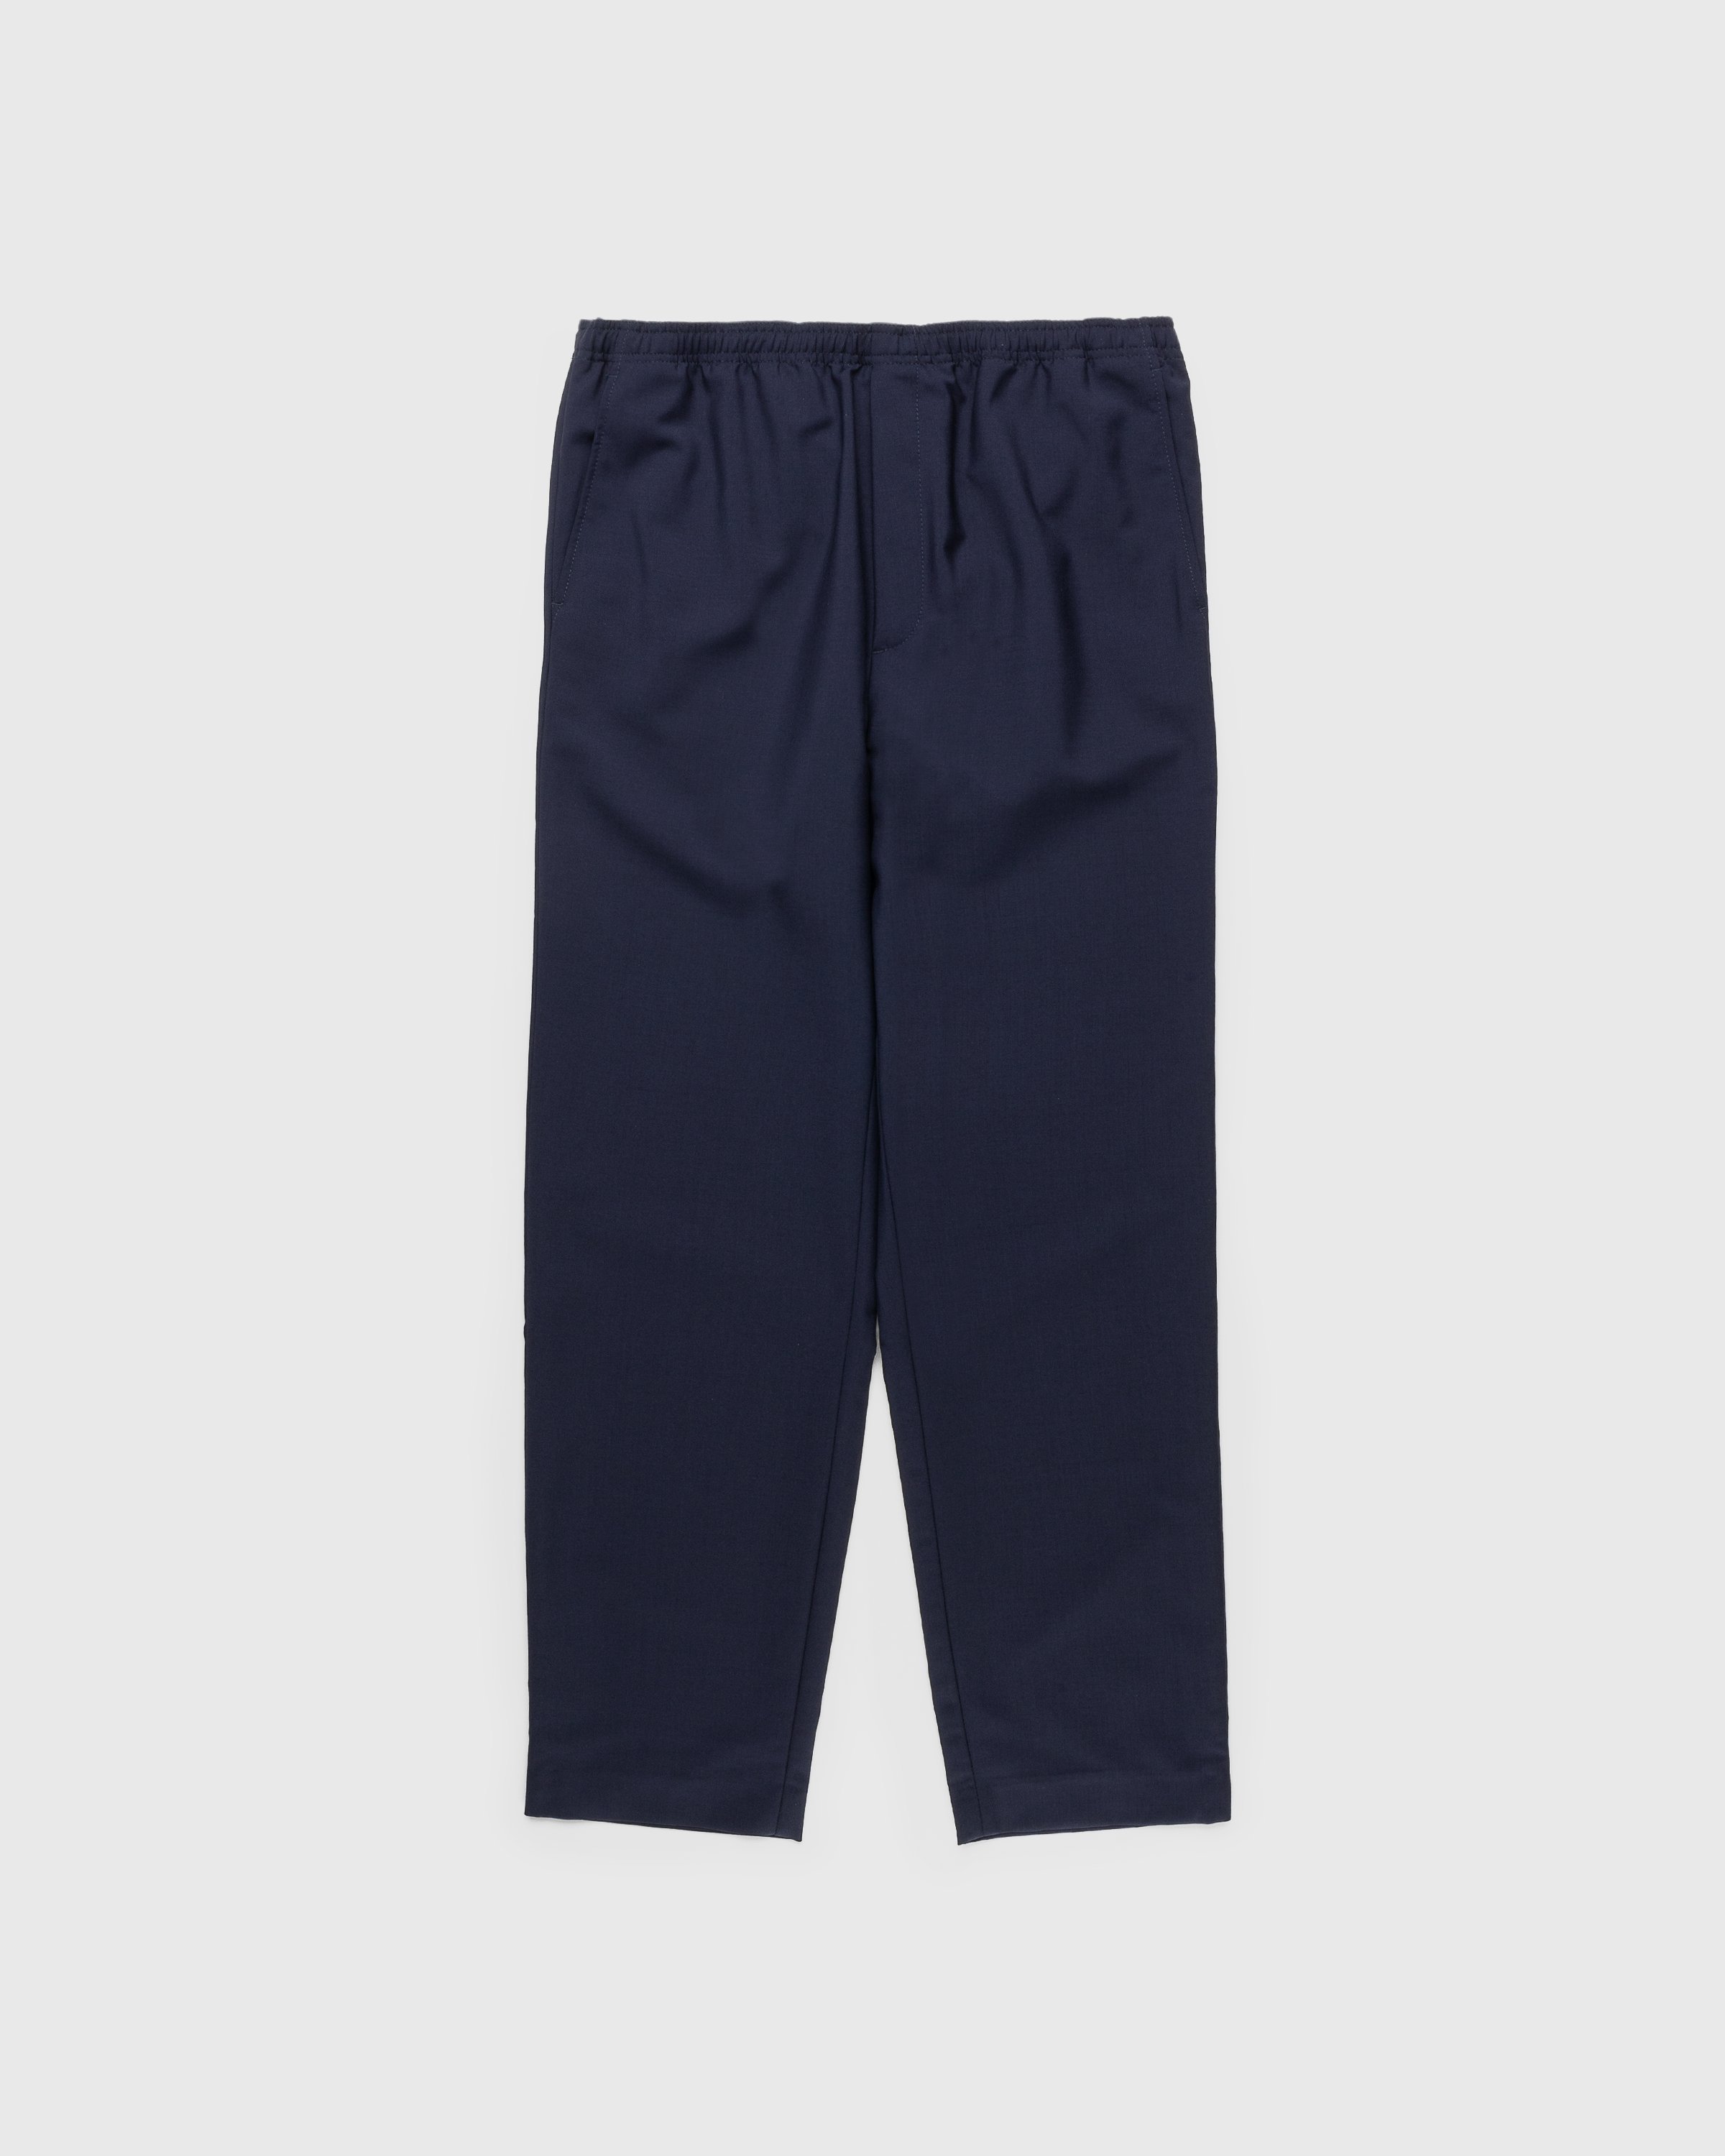 Acne Studios - Loose Fit Drawstring Trousers Blue - Clothing - Grey - Image 1